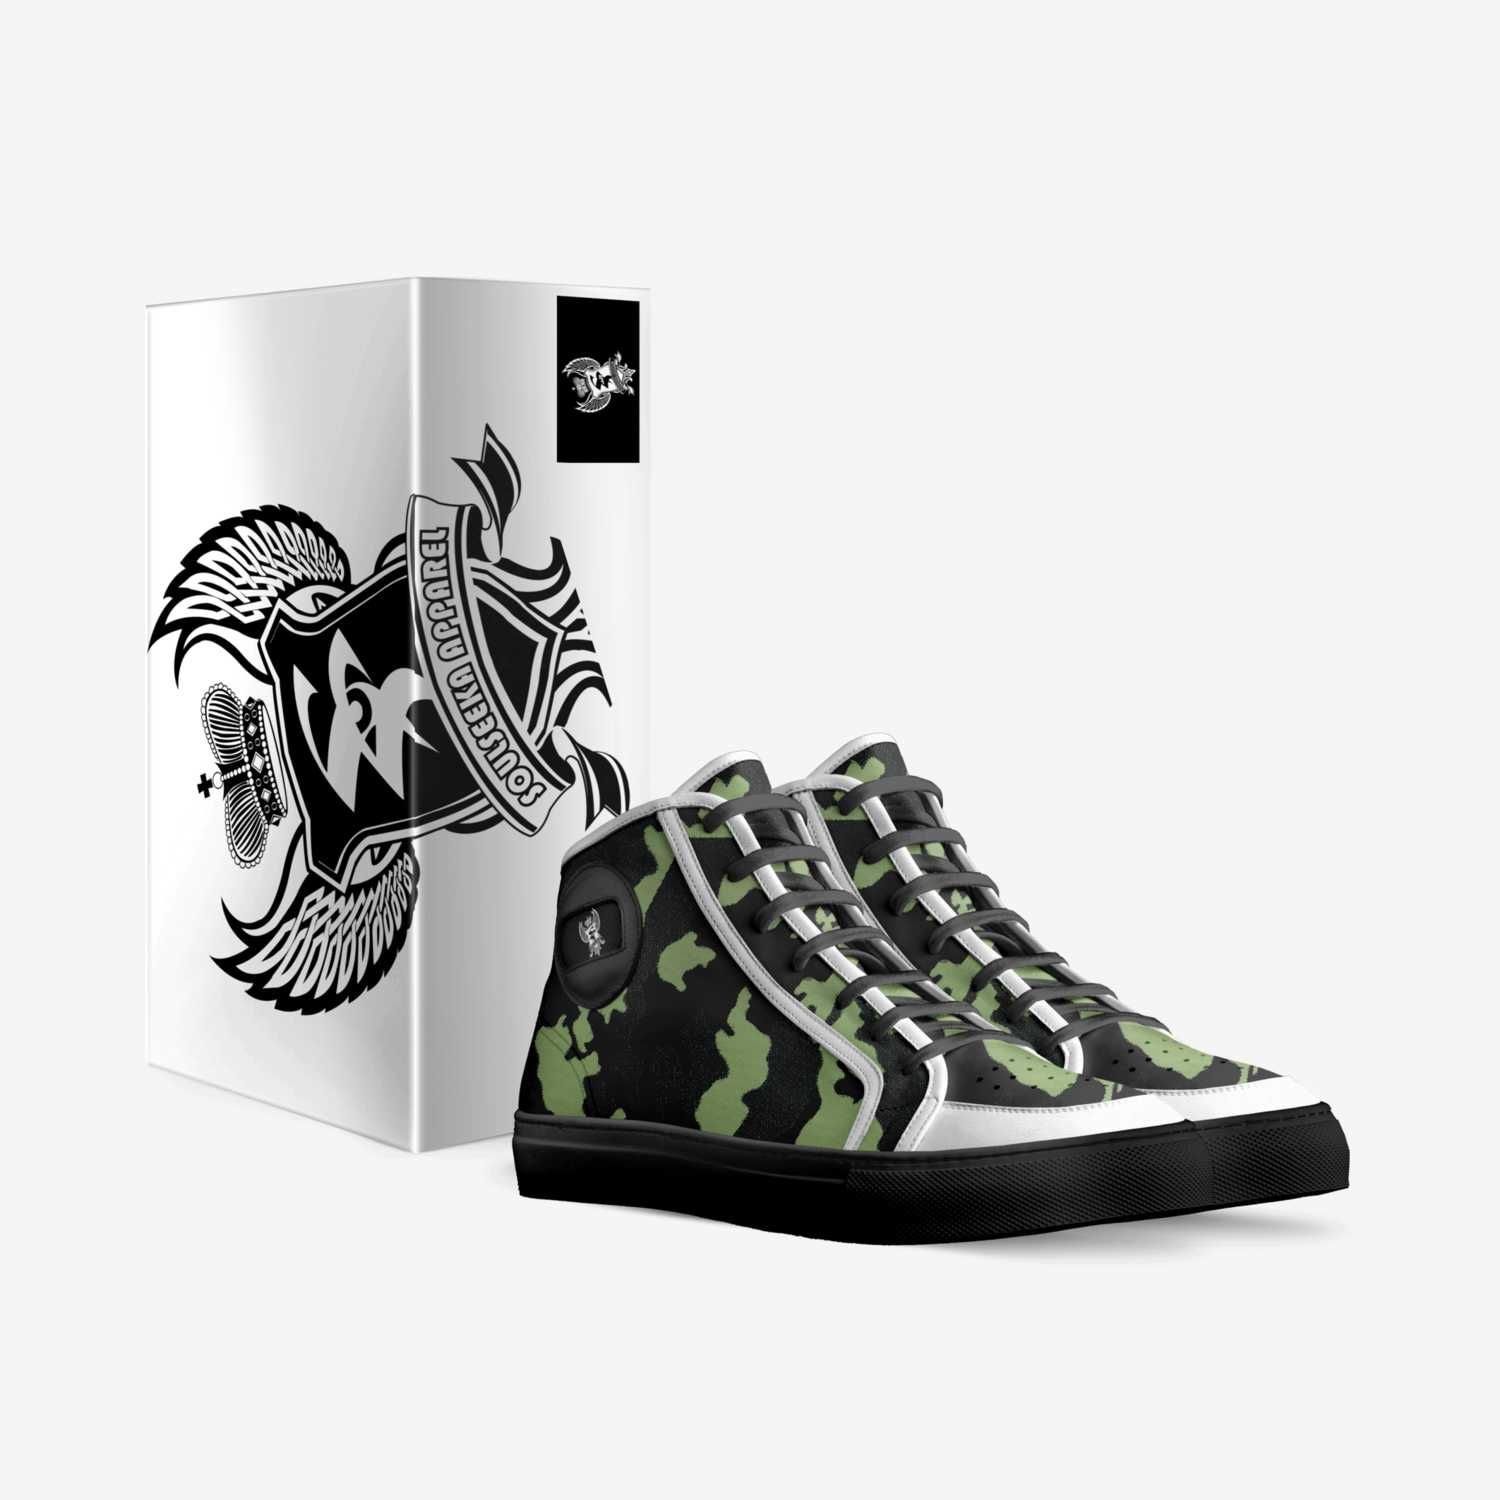 Seeka Pandemic custom made in Italy shoes by Rawle Griffith | Box view